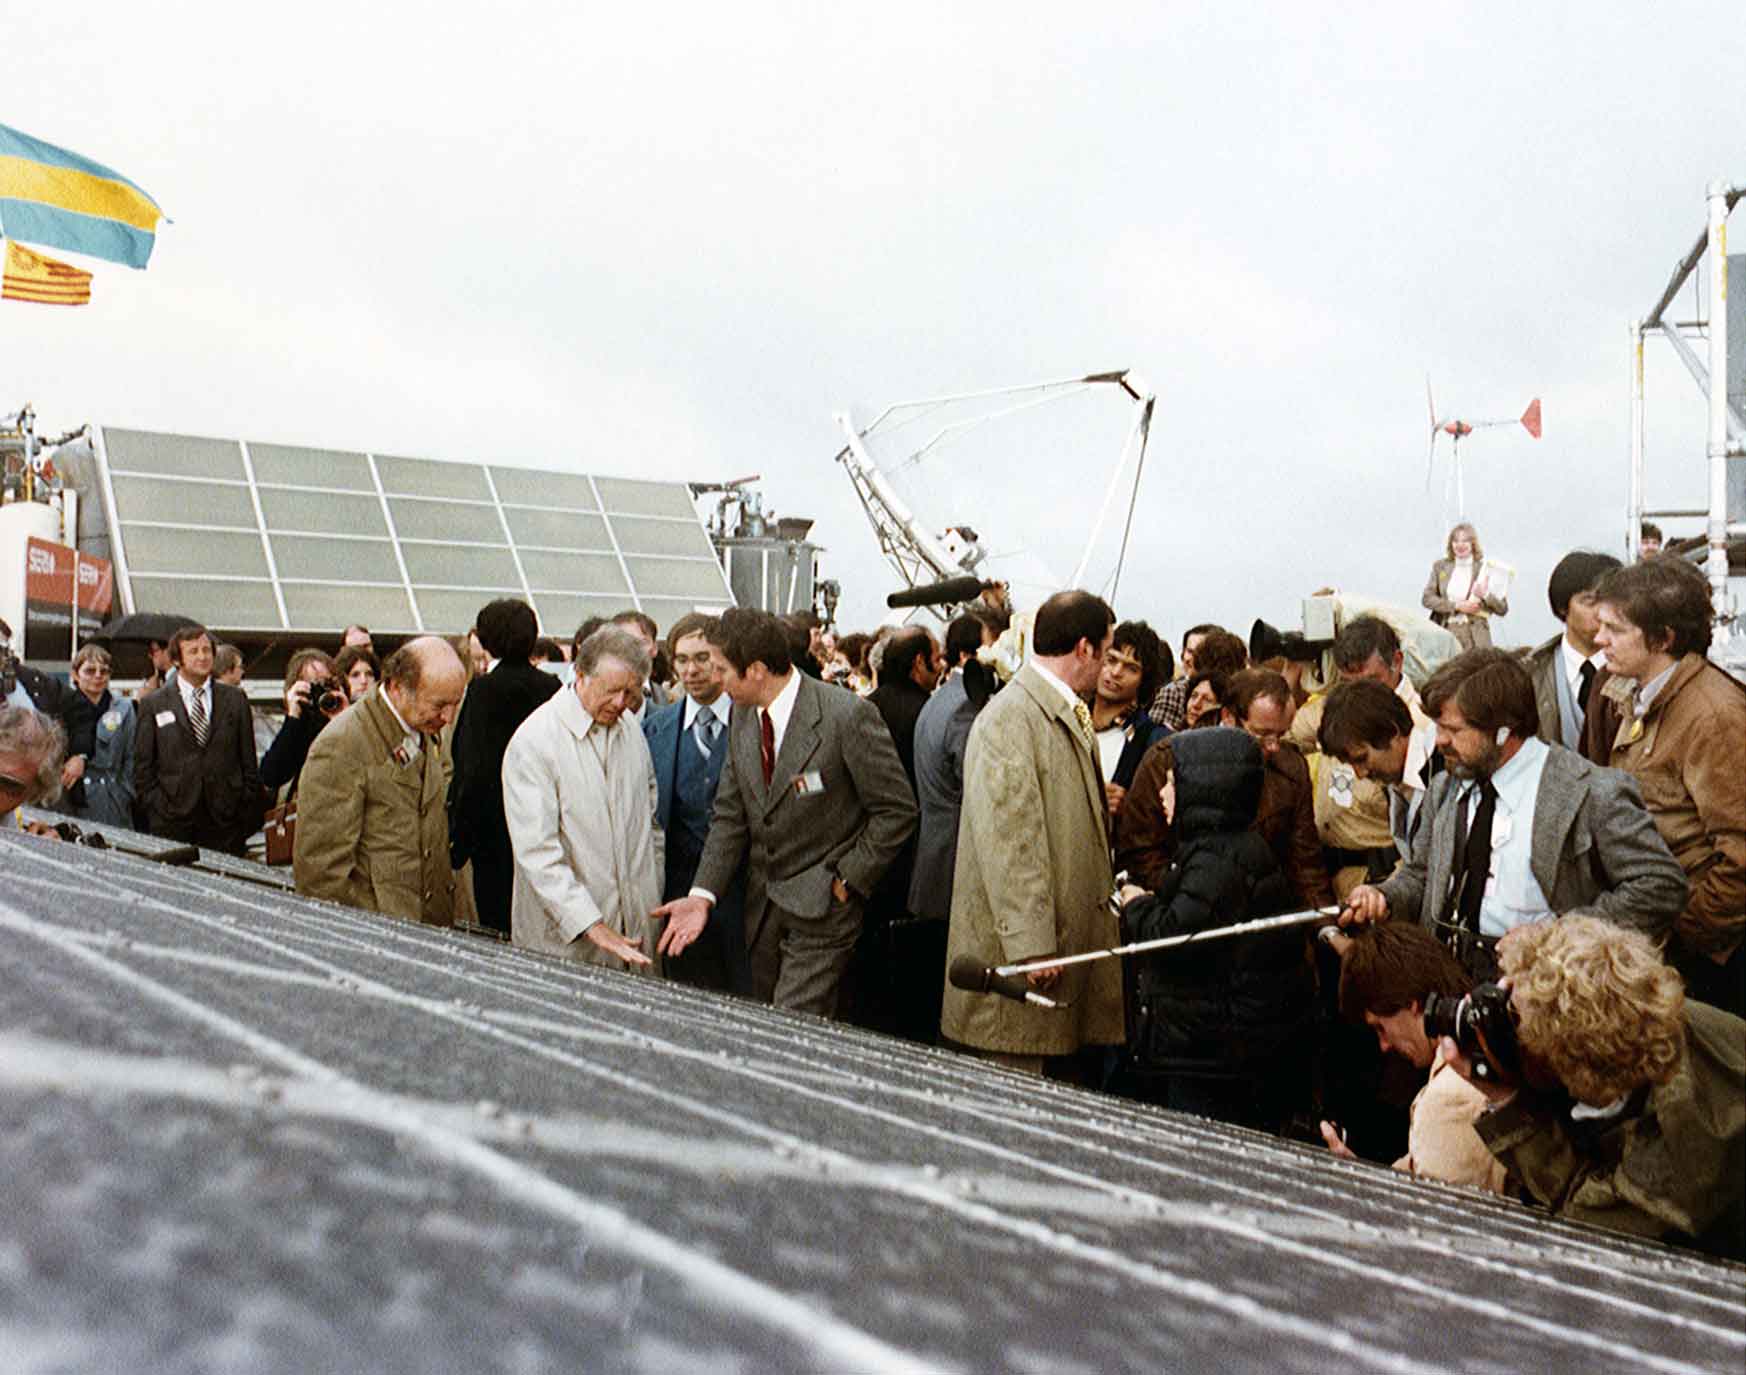 NREL at 40 It All Started With a Desire to Harness the Sun News NREL